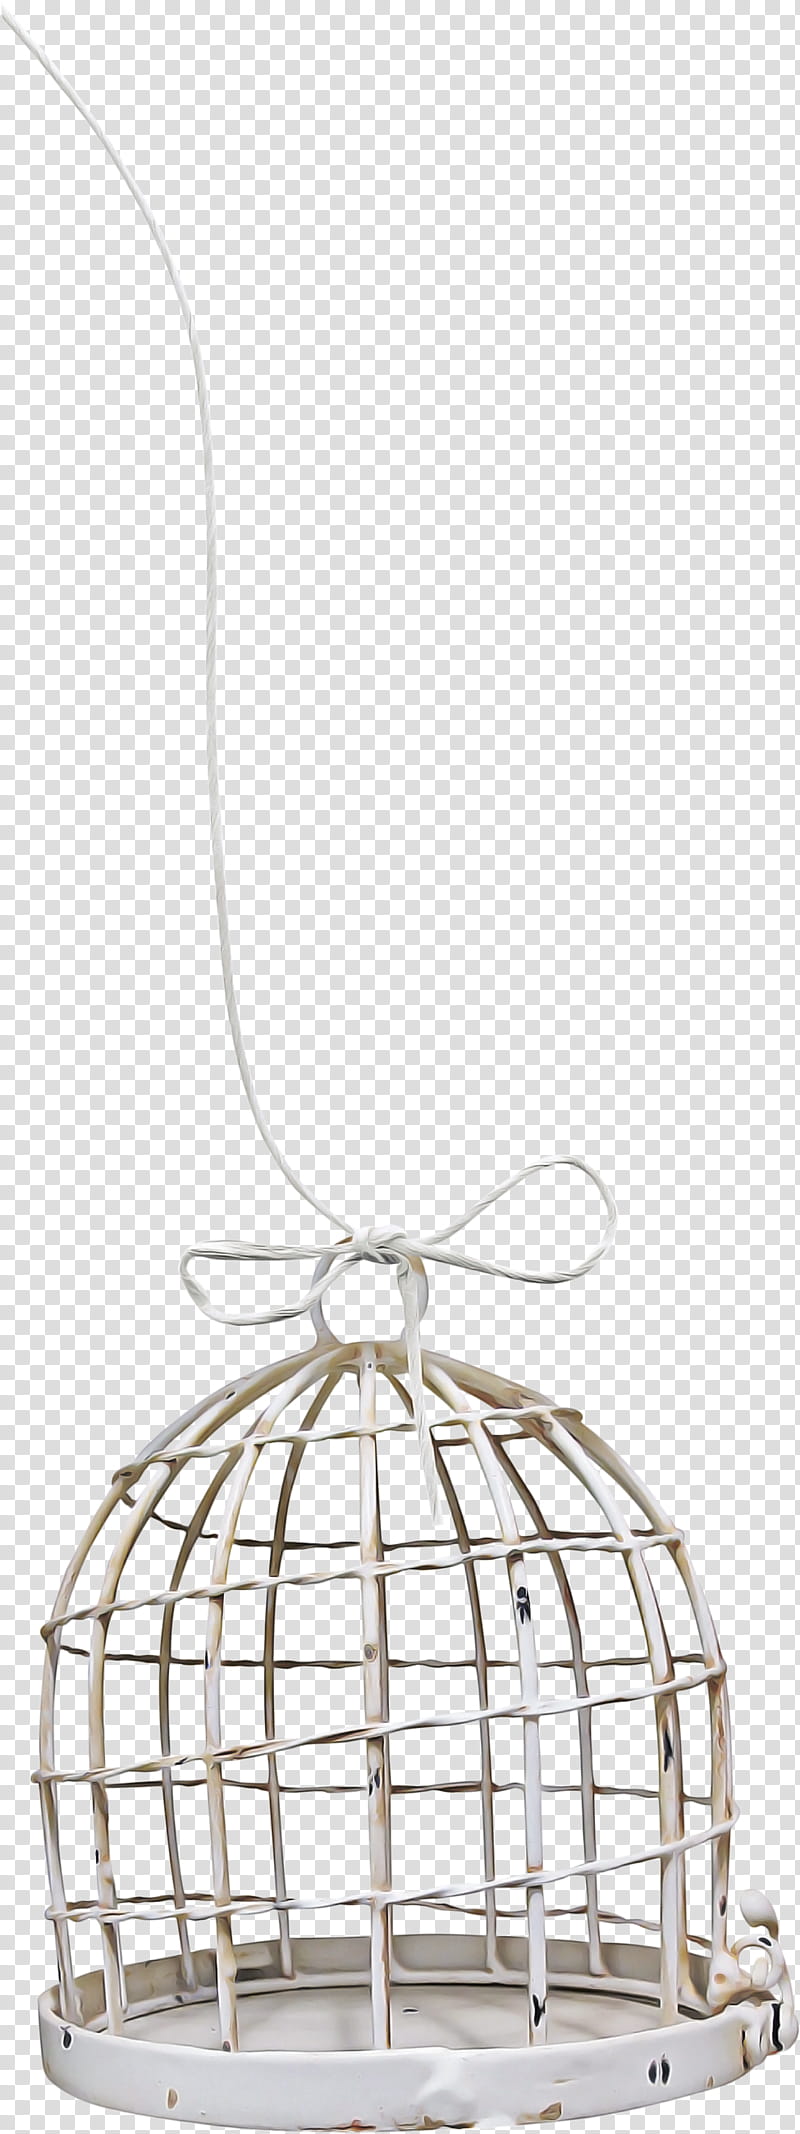 Bird Cage, Birdcage, Owl, Domestic Canary, Drawing, Watercolor Painting, Aviary, Lighting transparent background PNG clipart